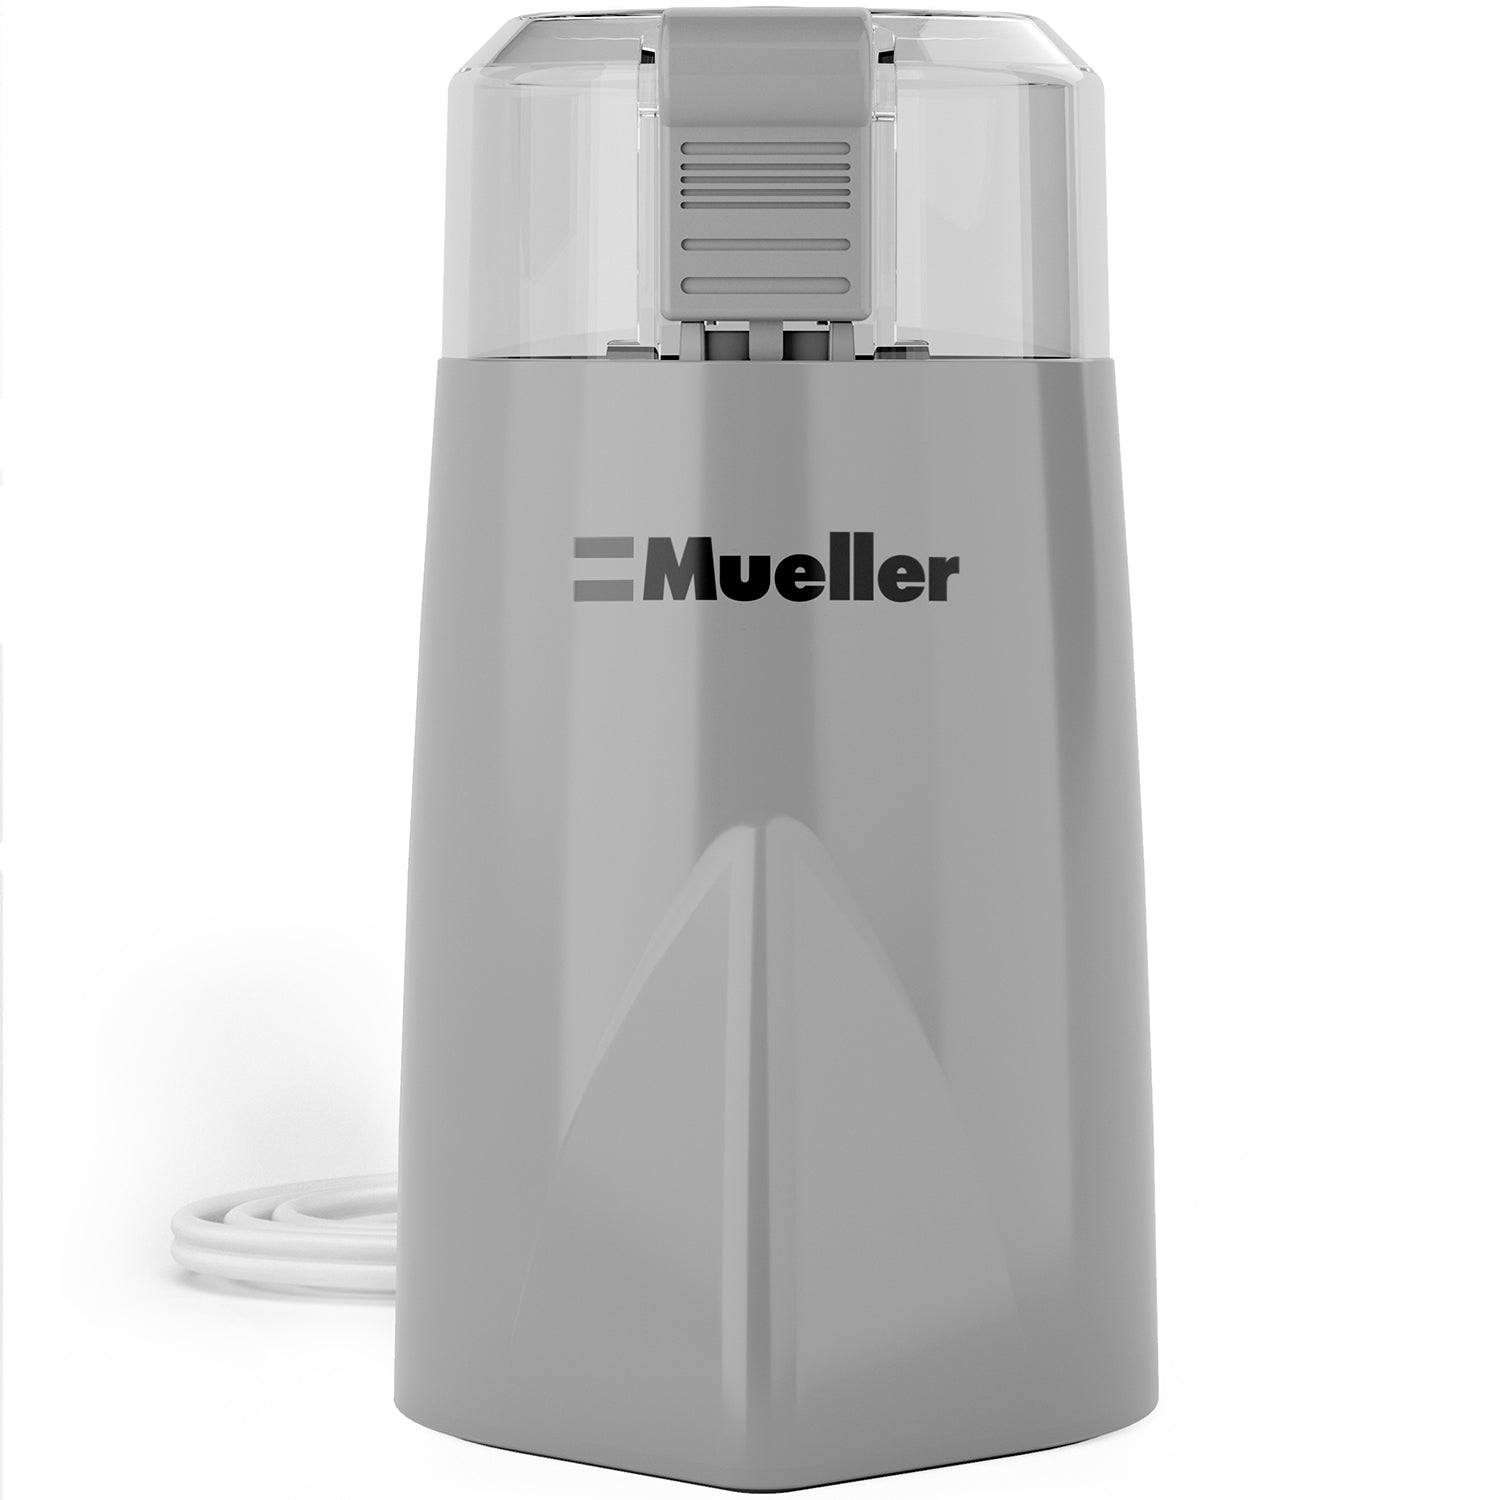 Mueller Electric HyperGrind Spice and Coffee Grinder - Grey – mueller_direct